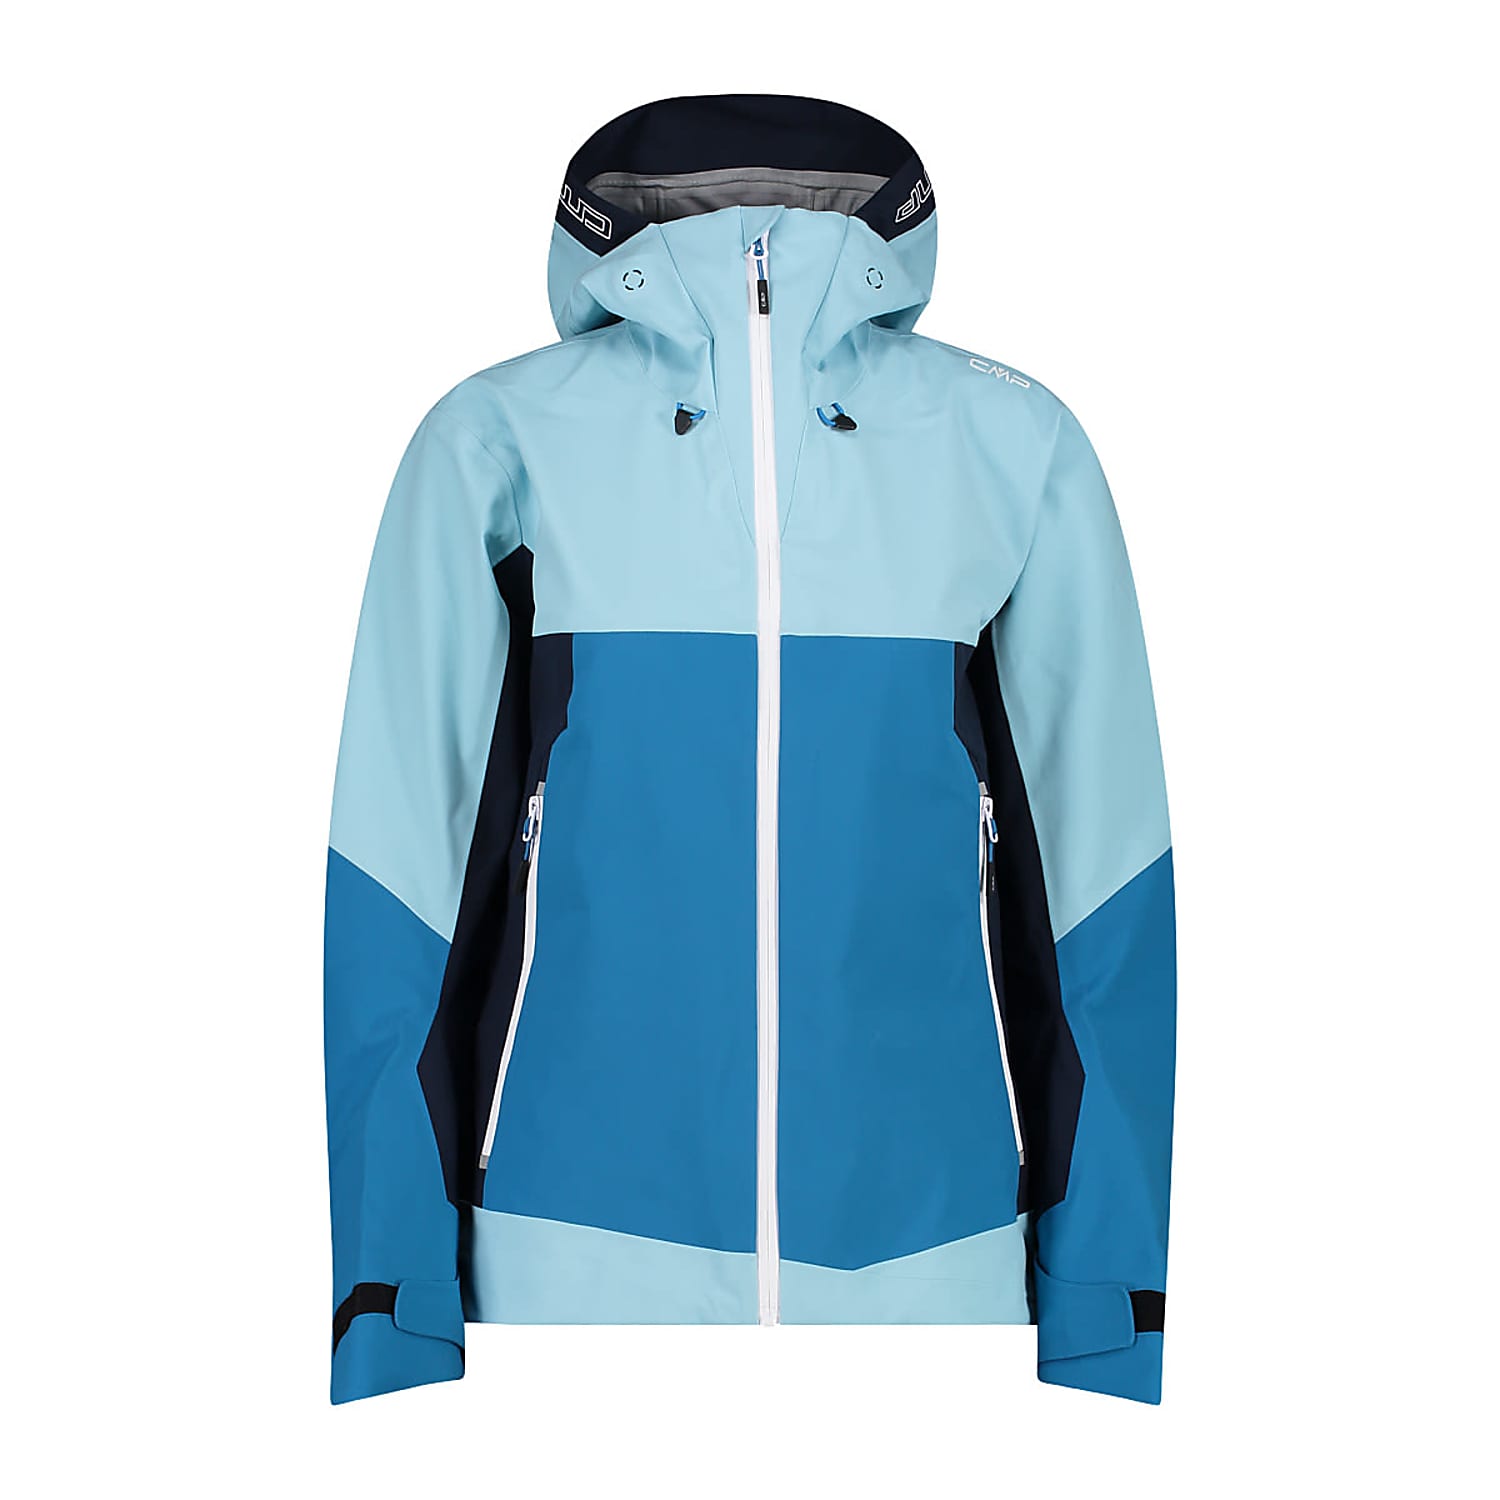 HOOD JACKET Fast shipping W 3 and Giada FIX - cheap CMP LAYER,